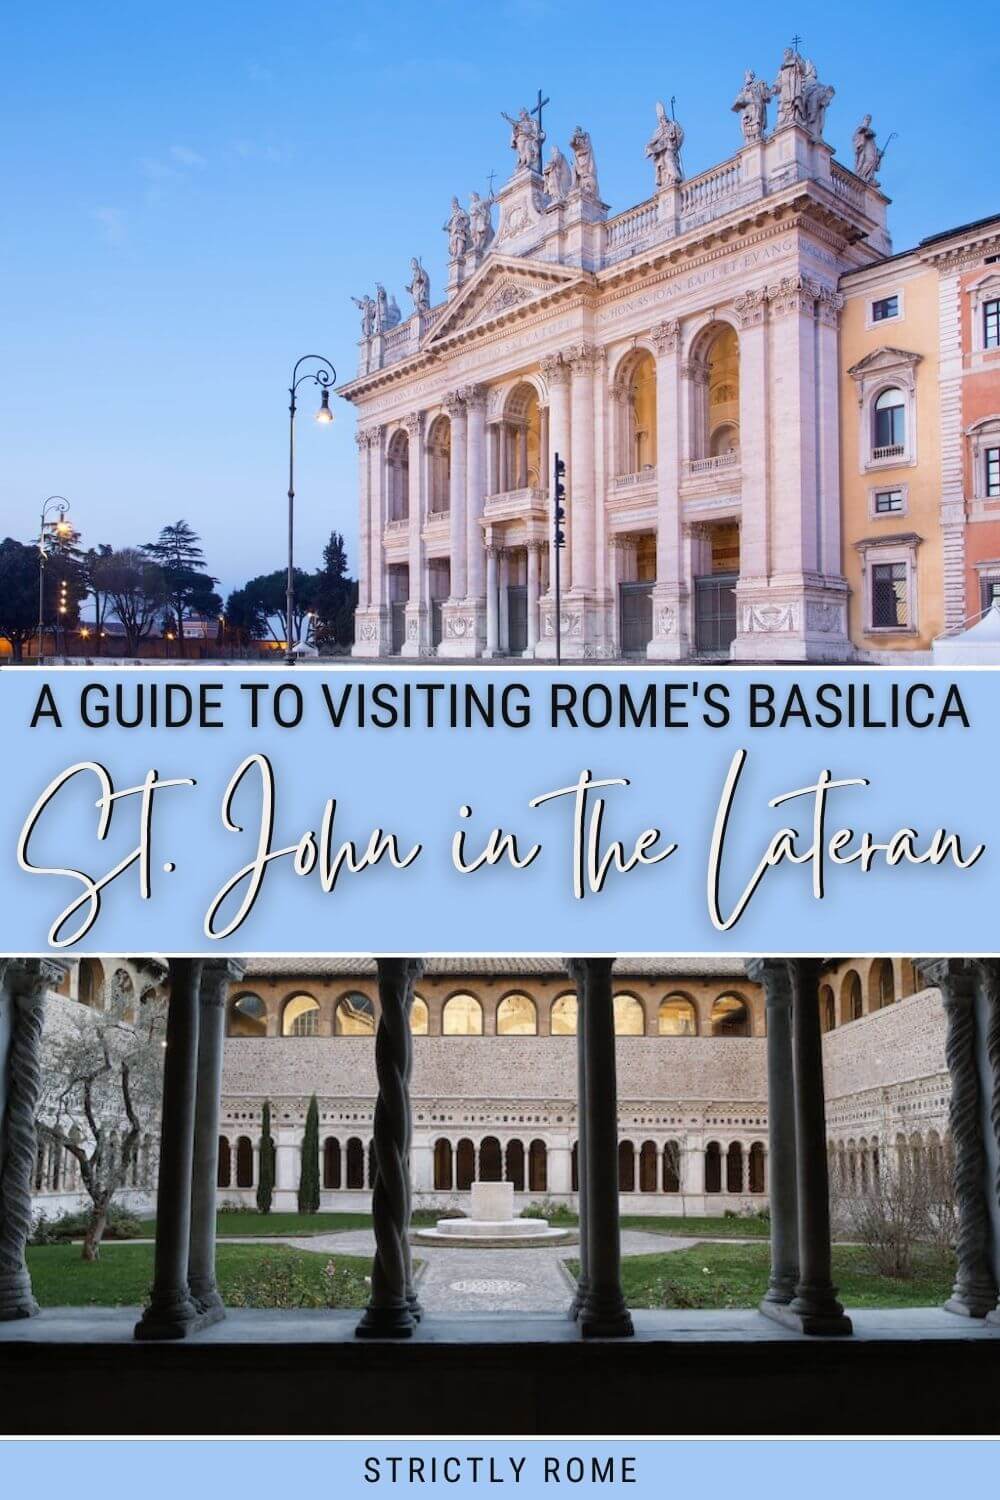 Discover how to visit St. John in the Lateran - via @strictlyrome